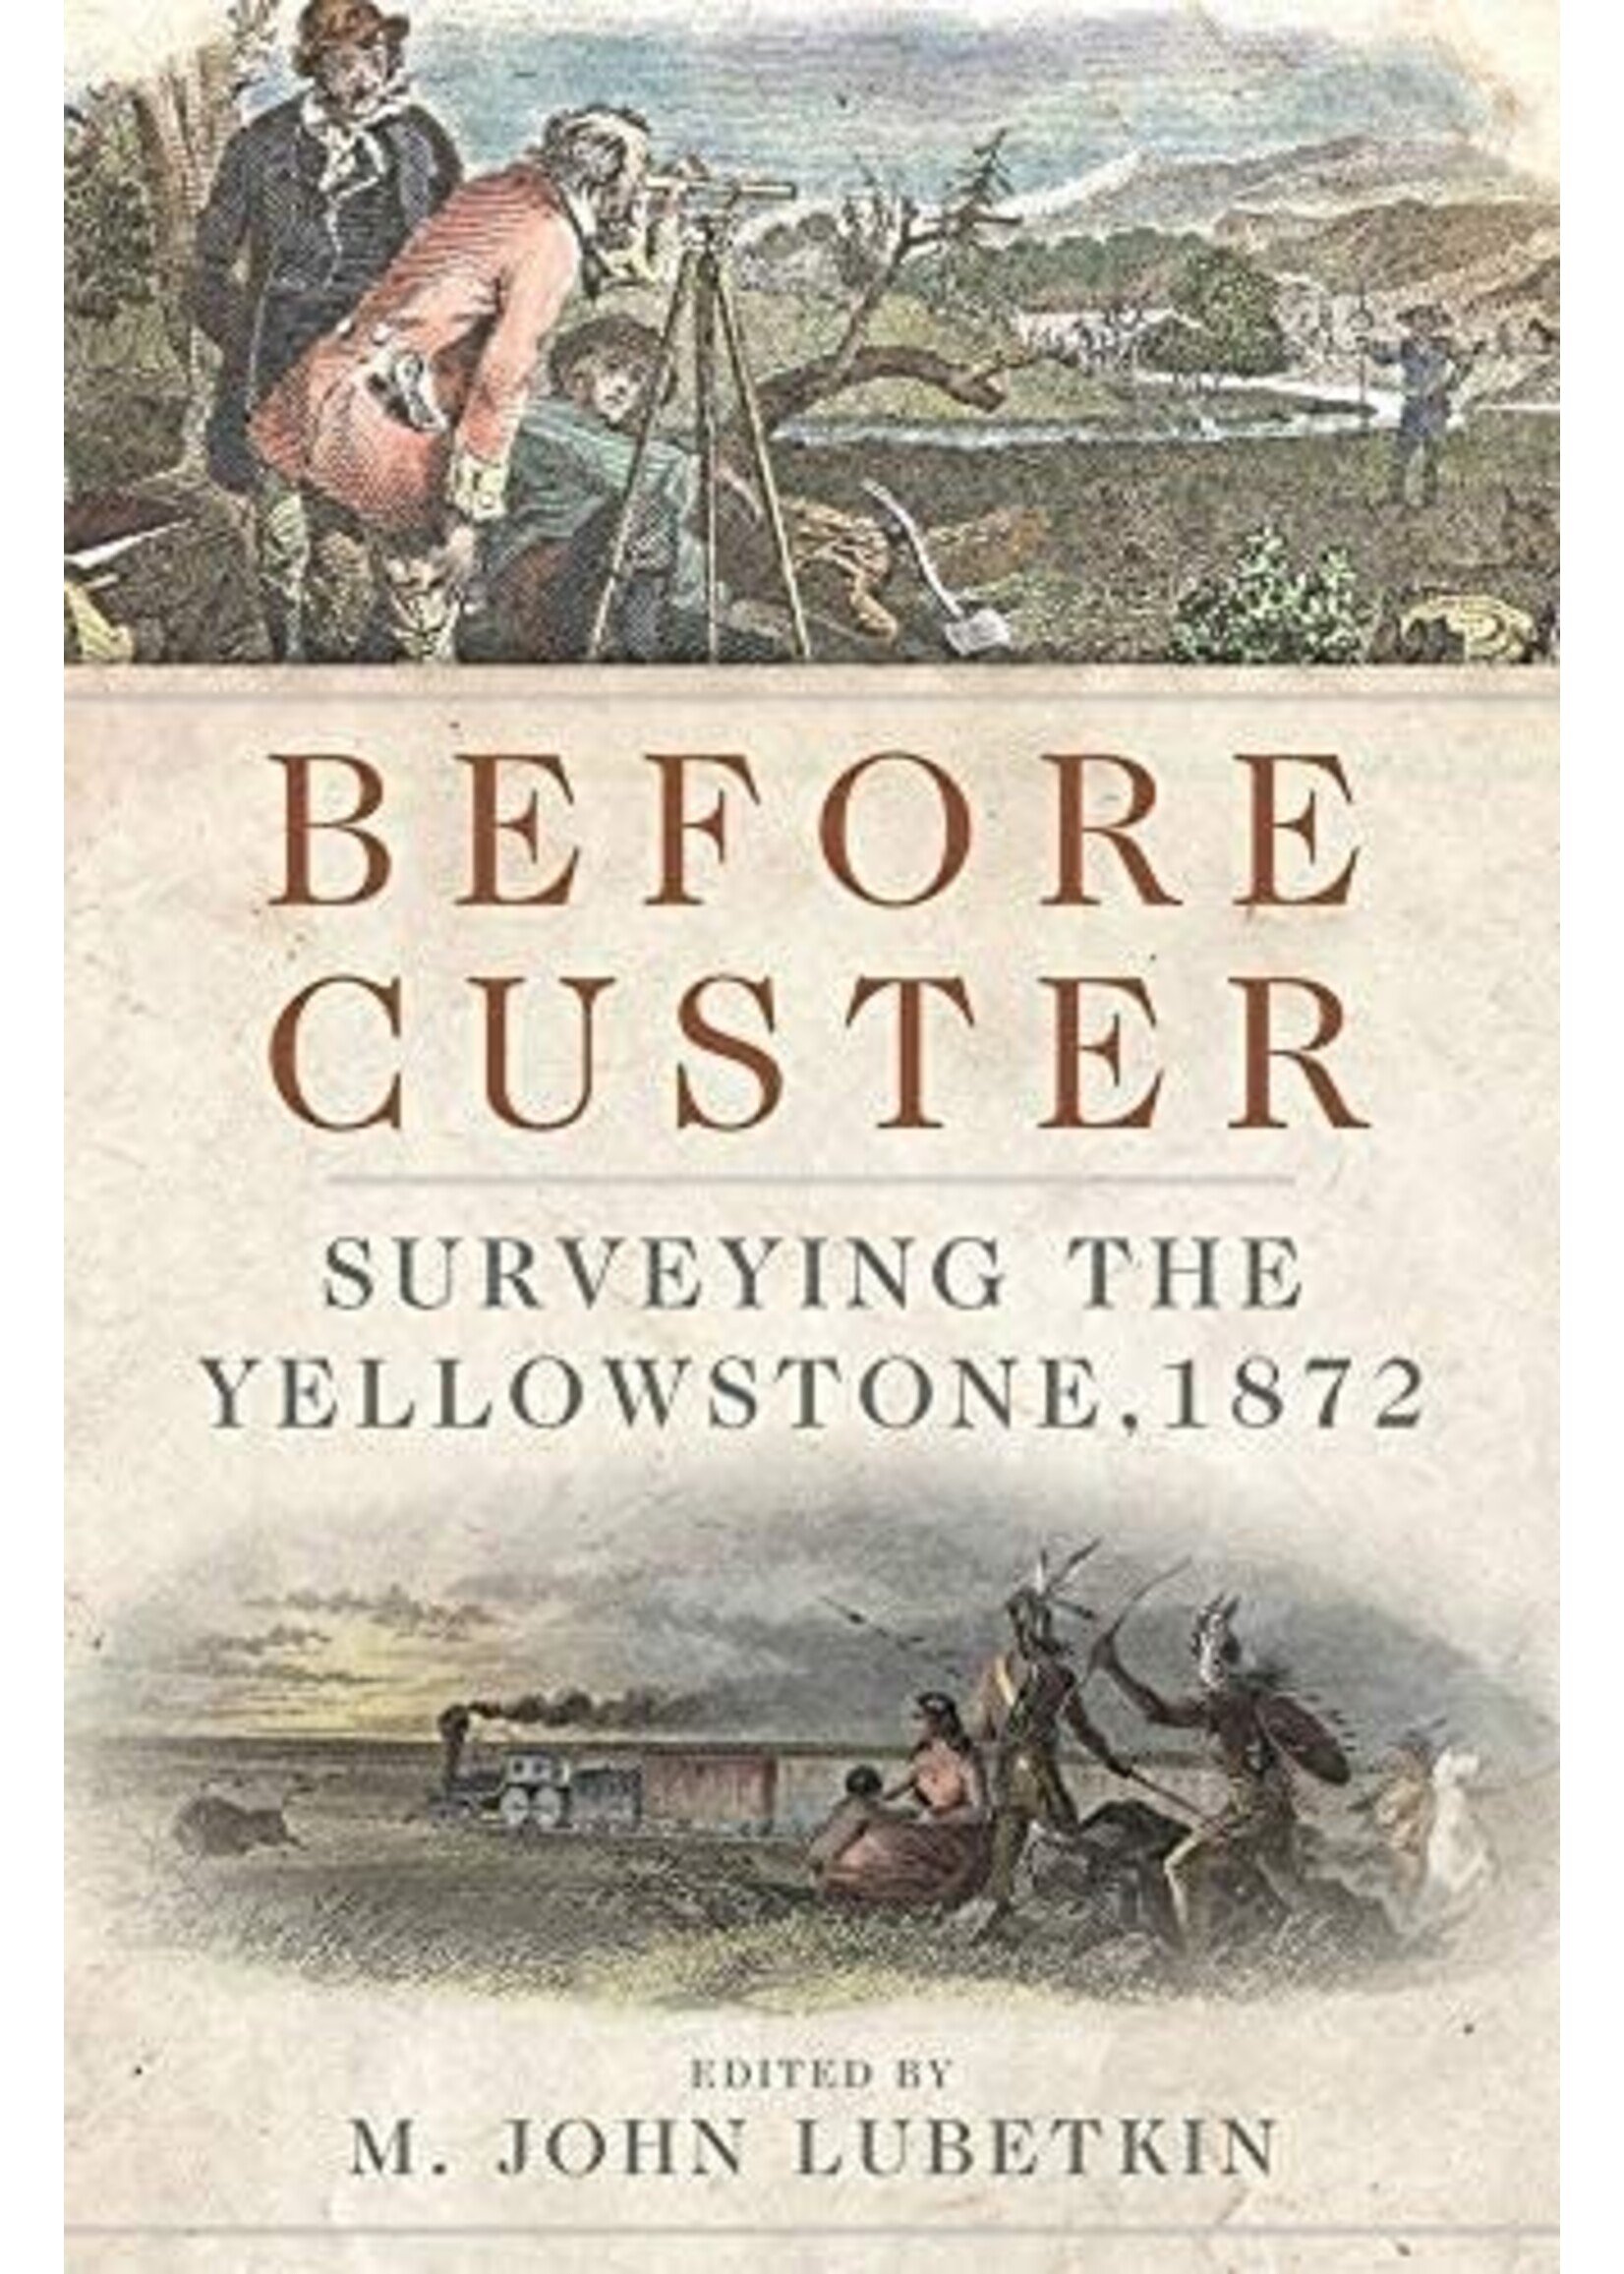 Before Custer: Surveying the Yellowstone, 1872 Hardcover (Frontier Military Series)